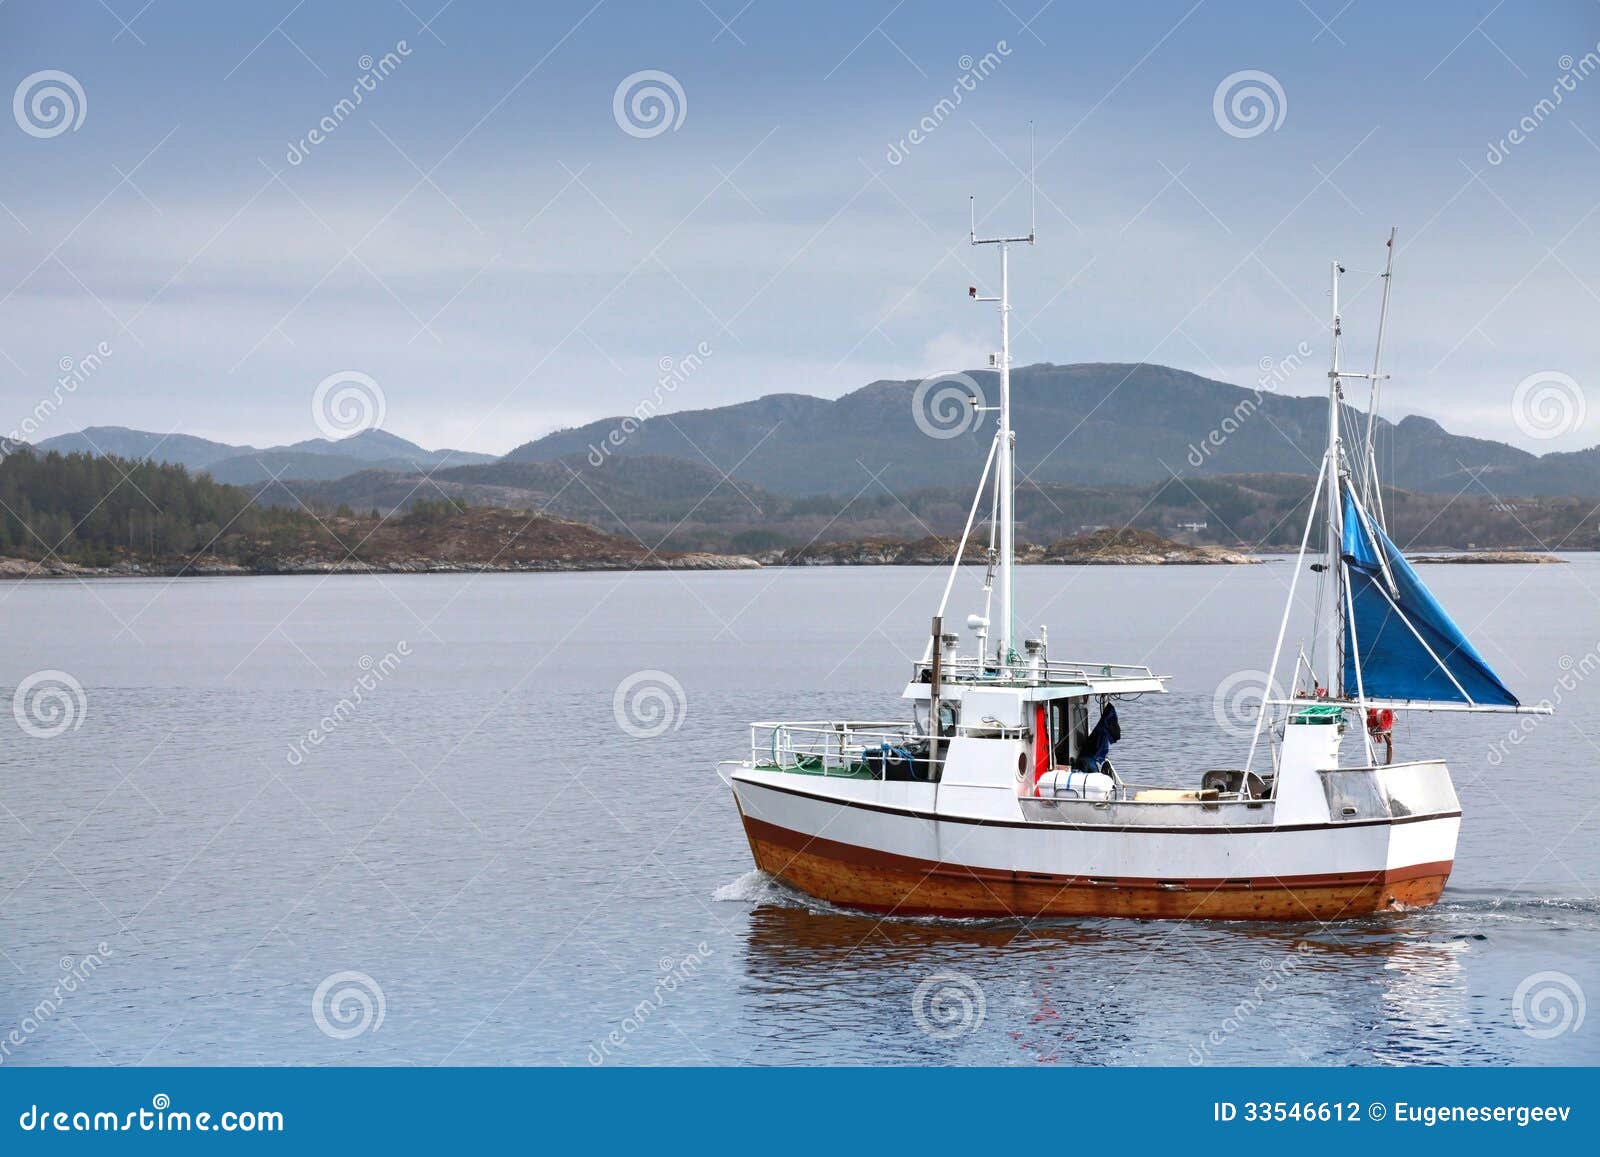 Pictures of Fishing Boats On Fjords Norway